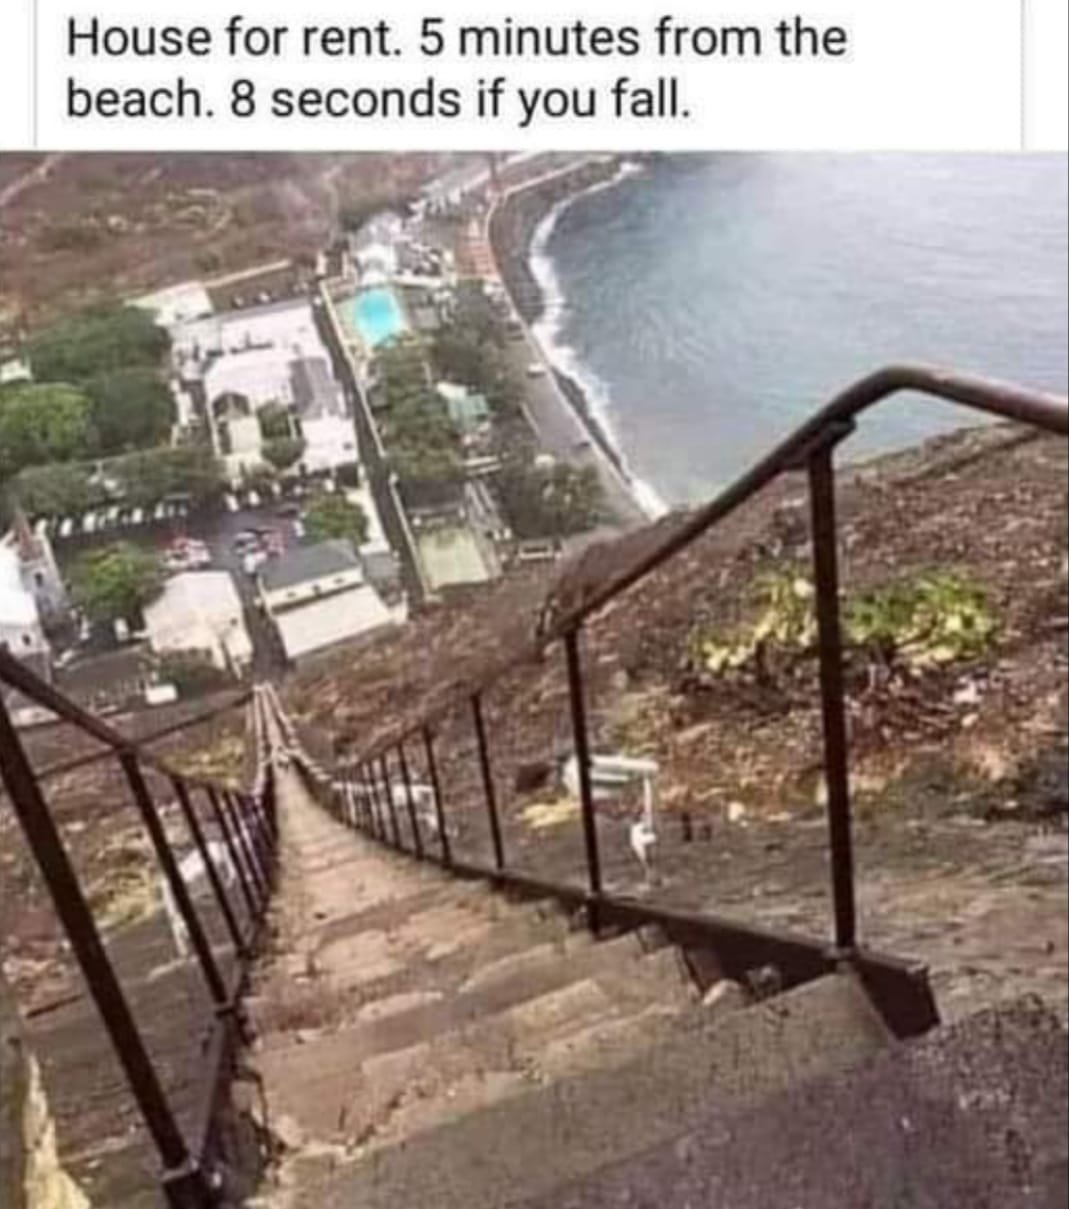 funny memes - dank memes - house for rent 5 minutes from the beach 8 seconds if you fall - House for rent. 5 minutes from the beach. 8 seconds if you fall.